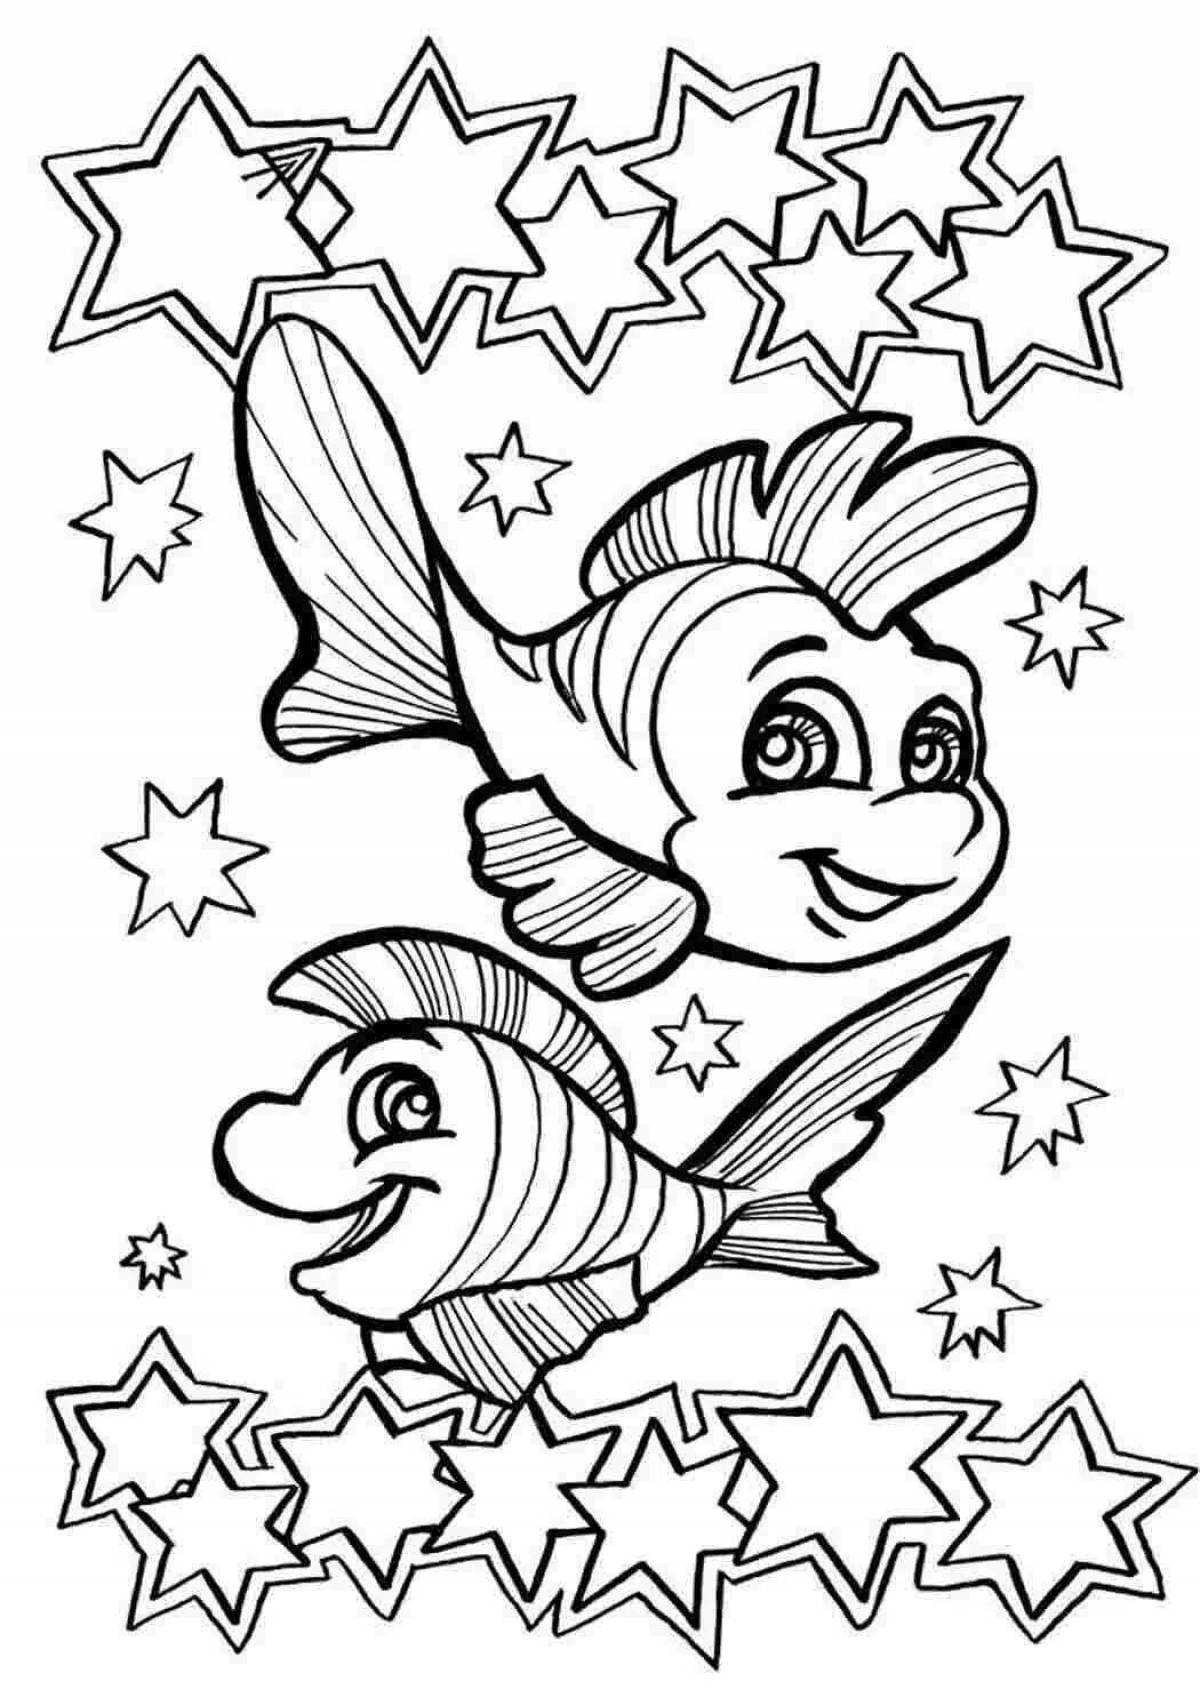 Colorful zodiac signs coloring pages for kids to express